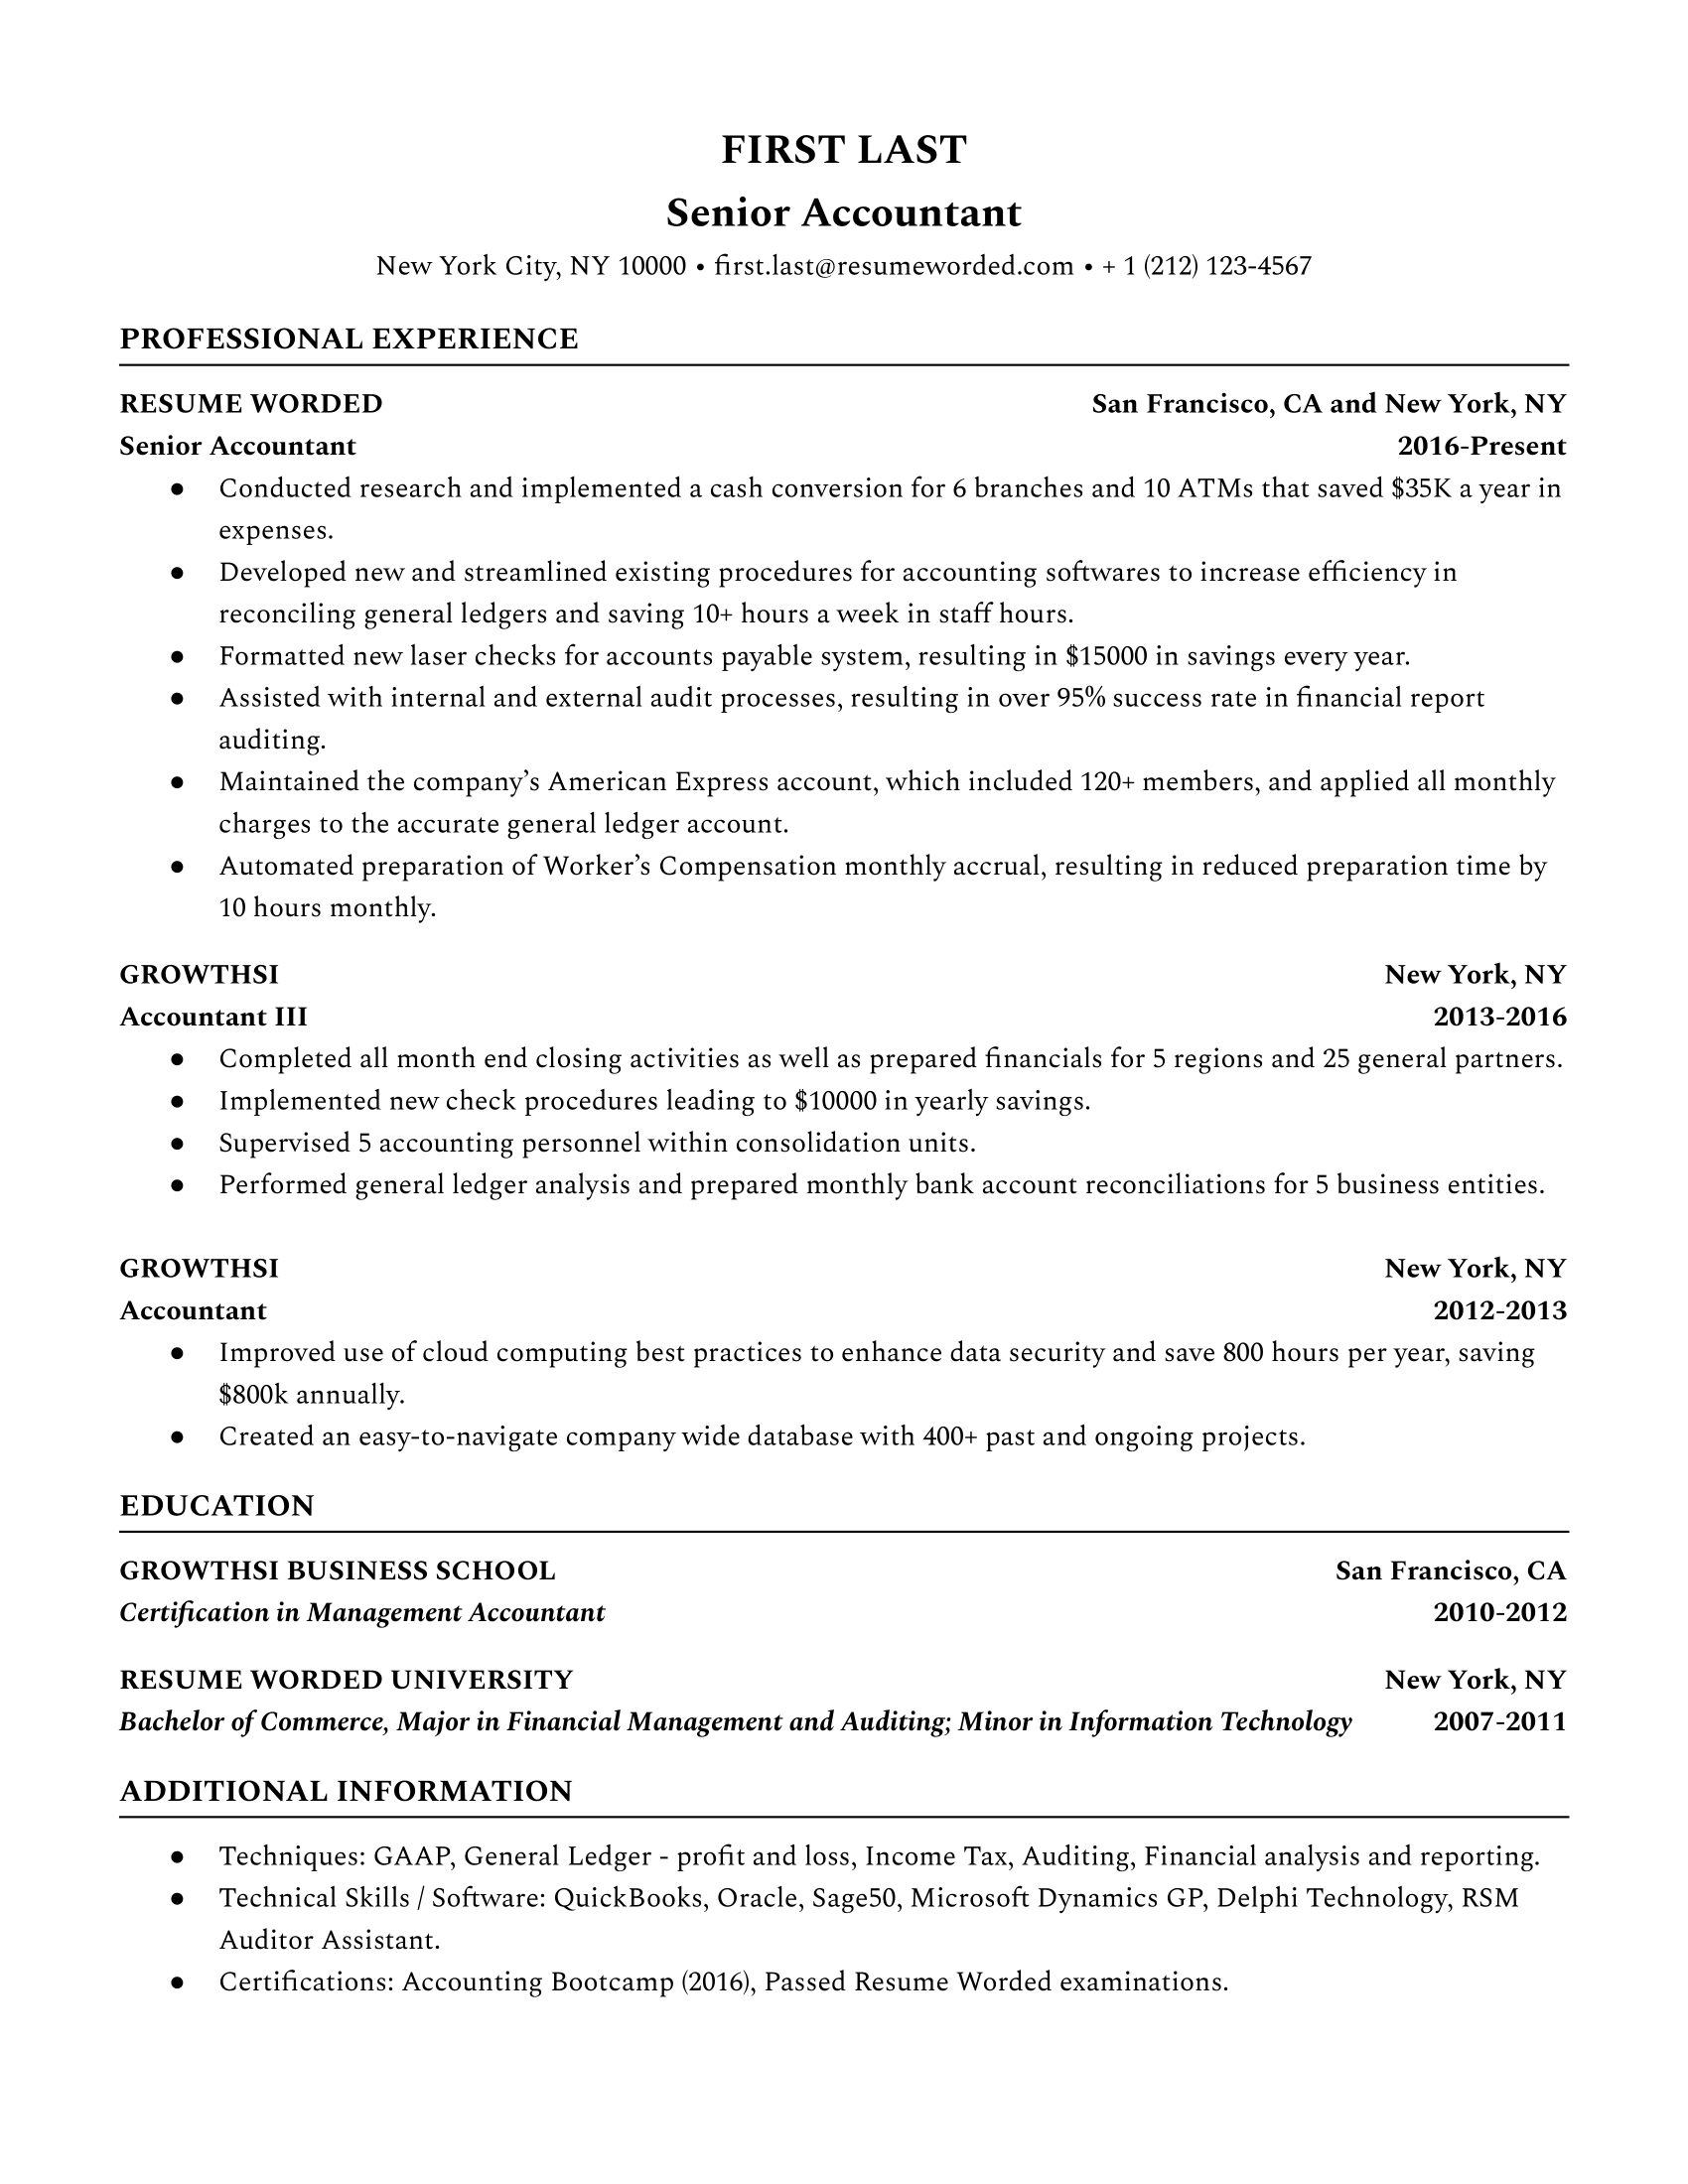 CV of a skilled senior accountant showcasing software proficiency and regulatory compliance expertise.